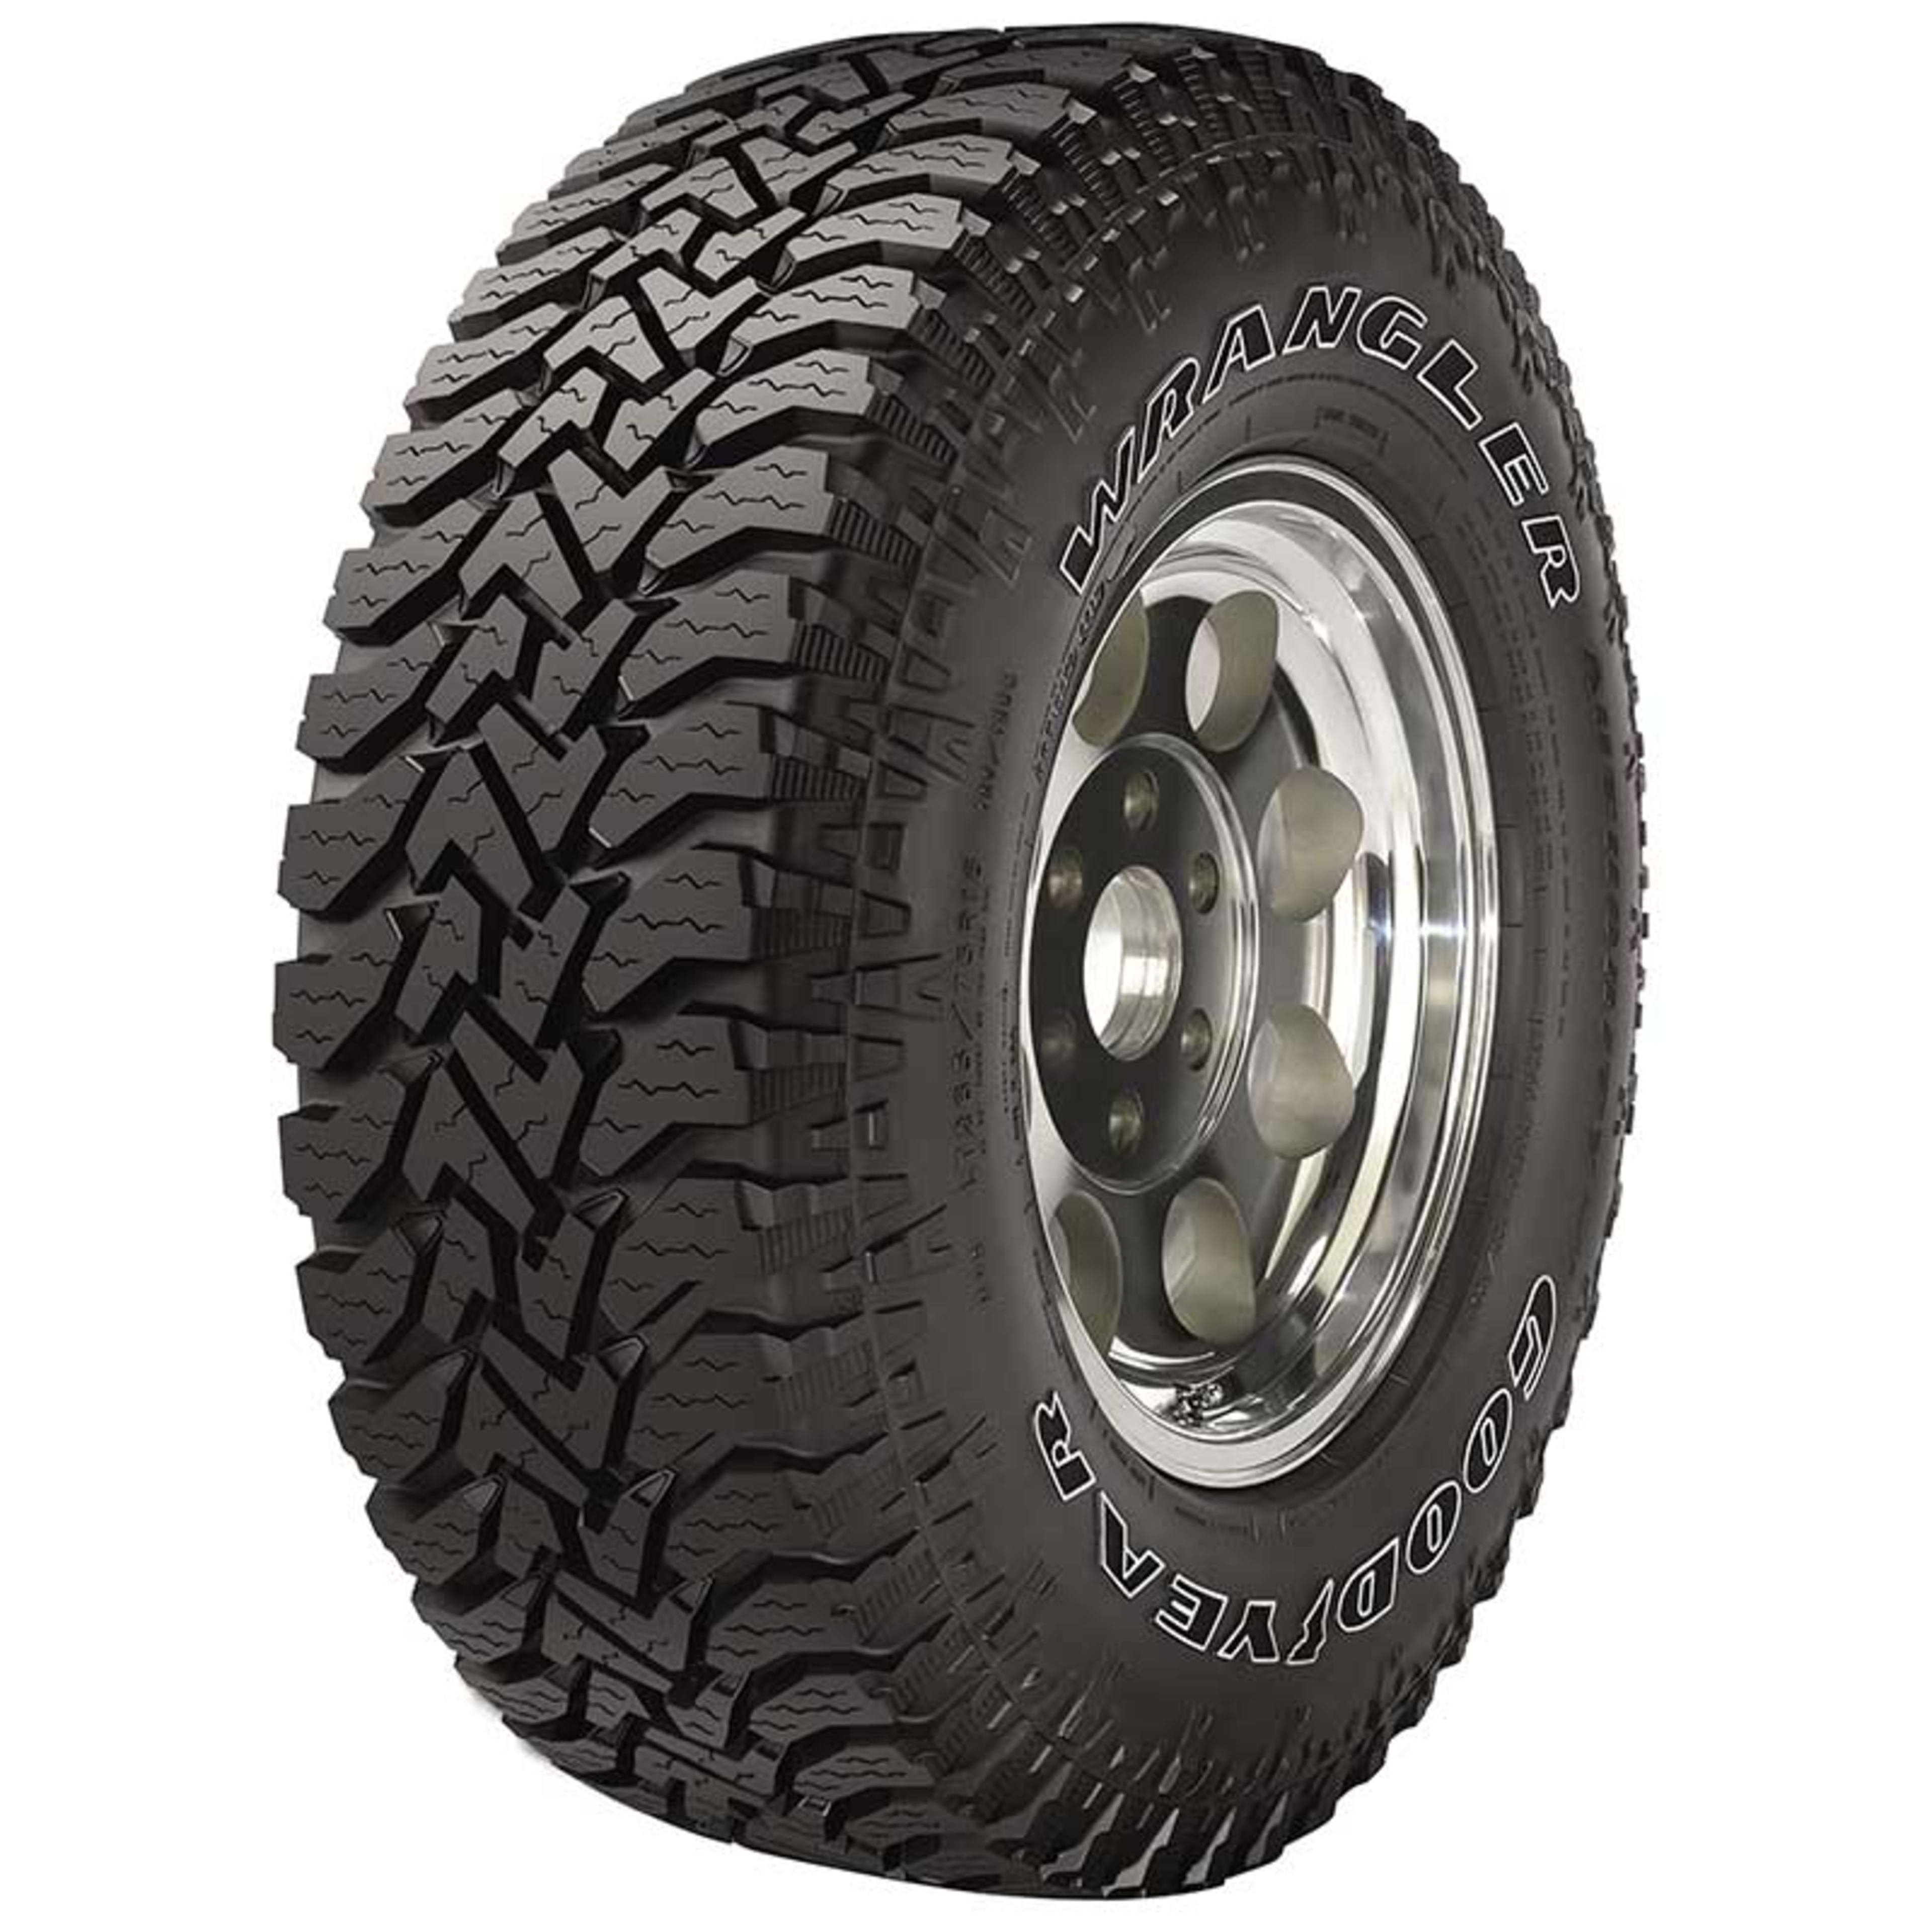 Goodyear Wrangler Authority A/T Tire Reviews & Ratings | SimpleTire